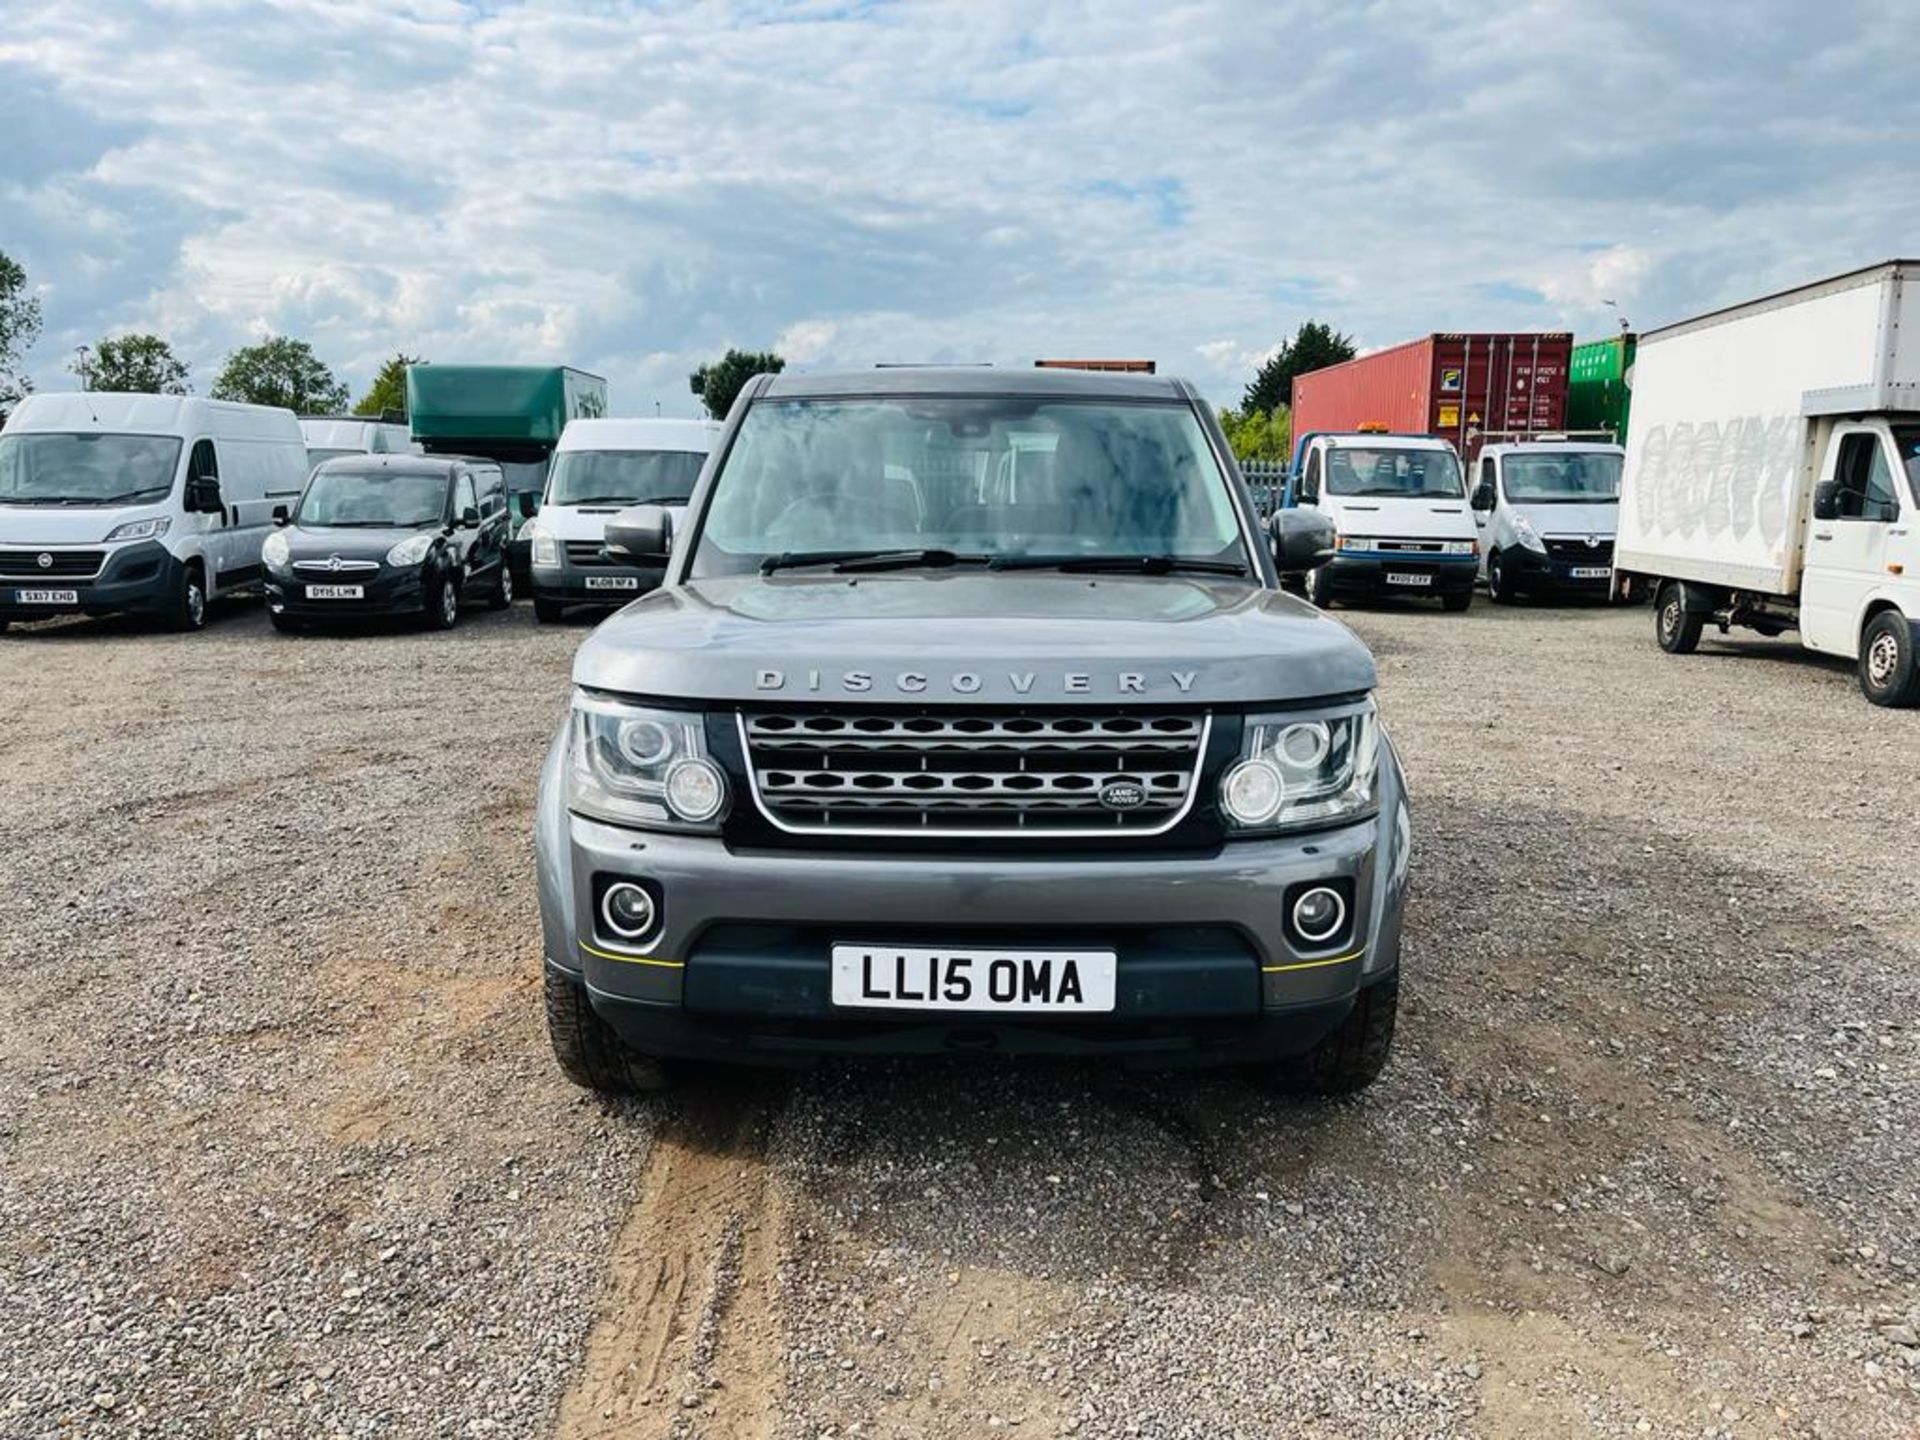 ** ON SALE **Land Rover Discovery 4 XS 3.0 SDV6 CommandShift Auto Commercial 2015 '65 Reg' - Sat Nav - Image 2 of 25